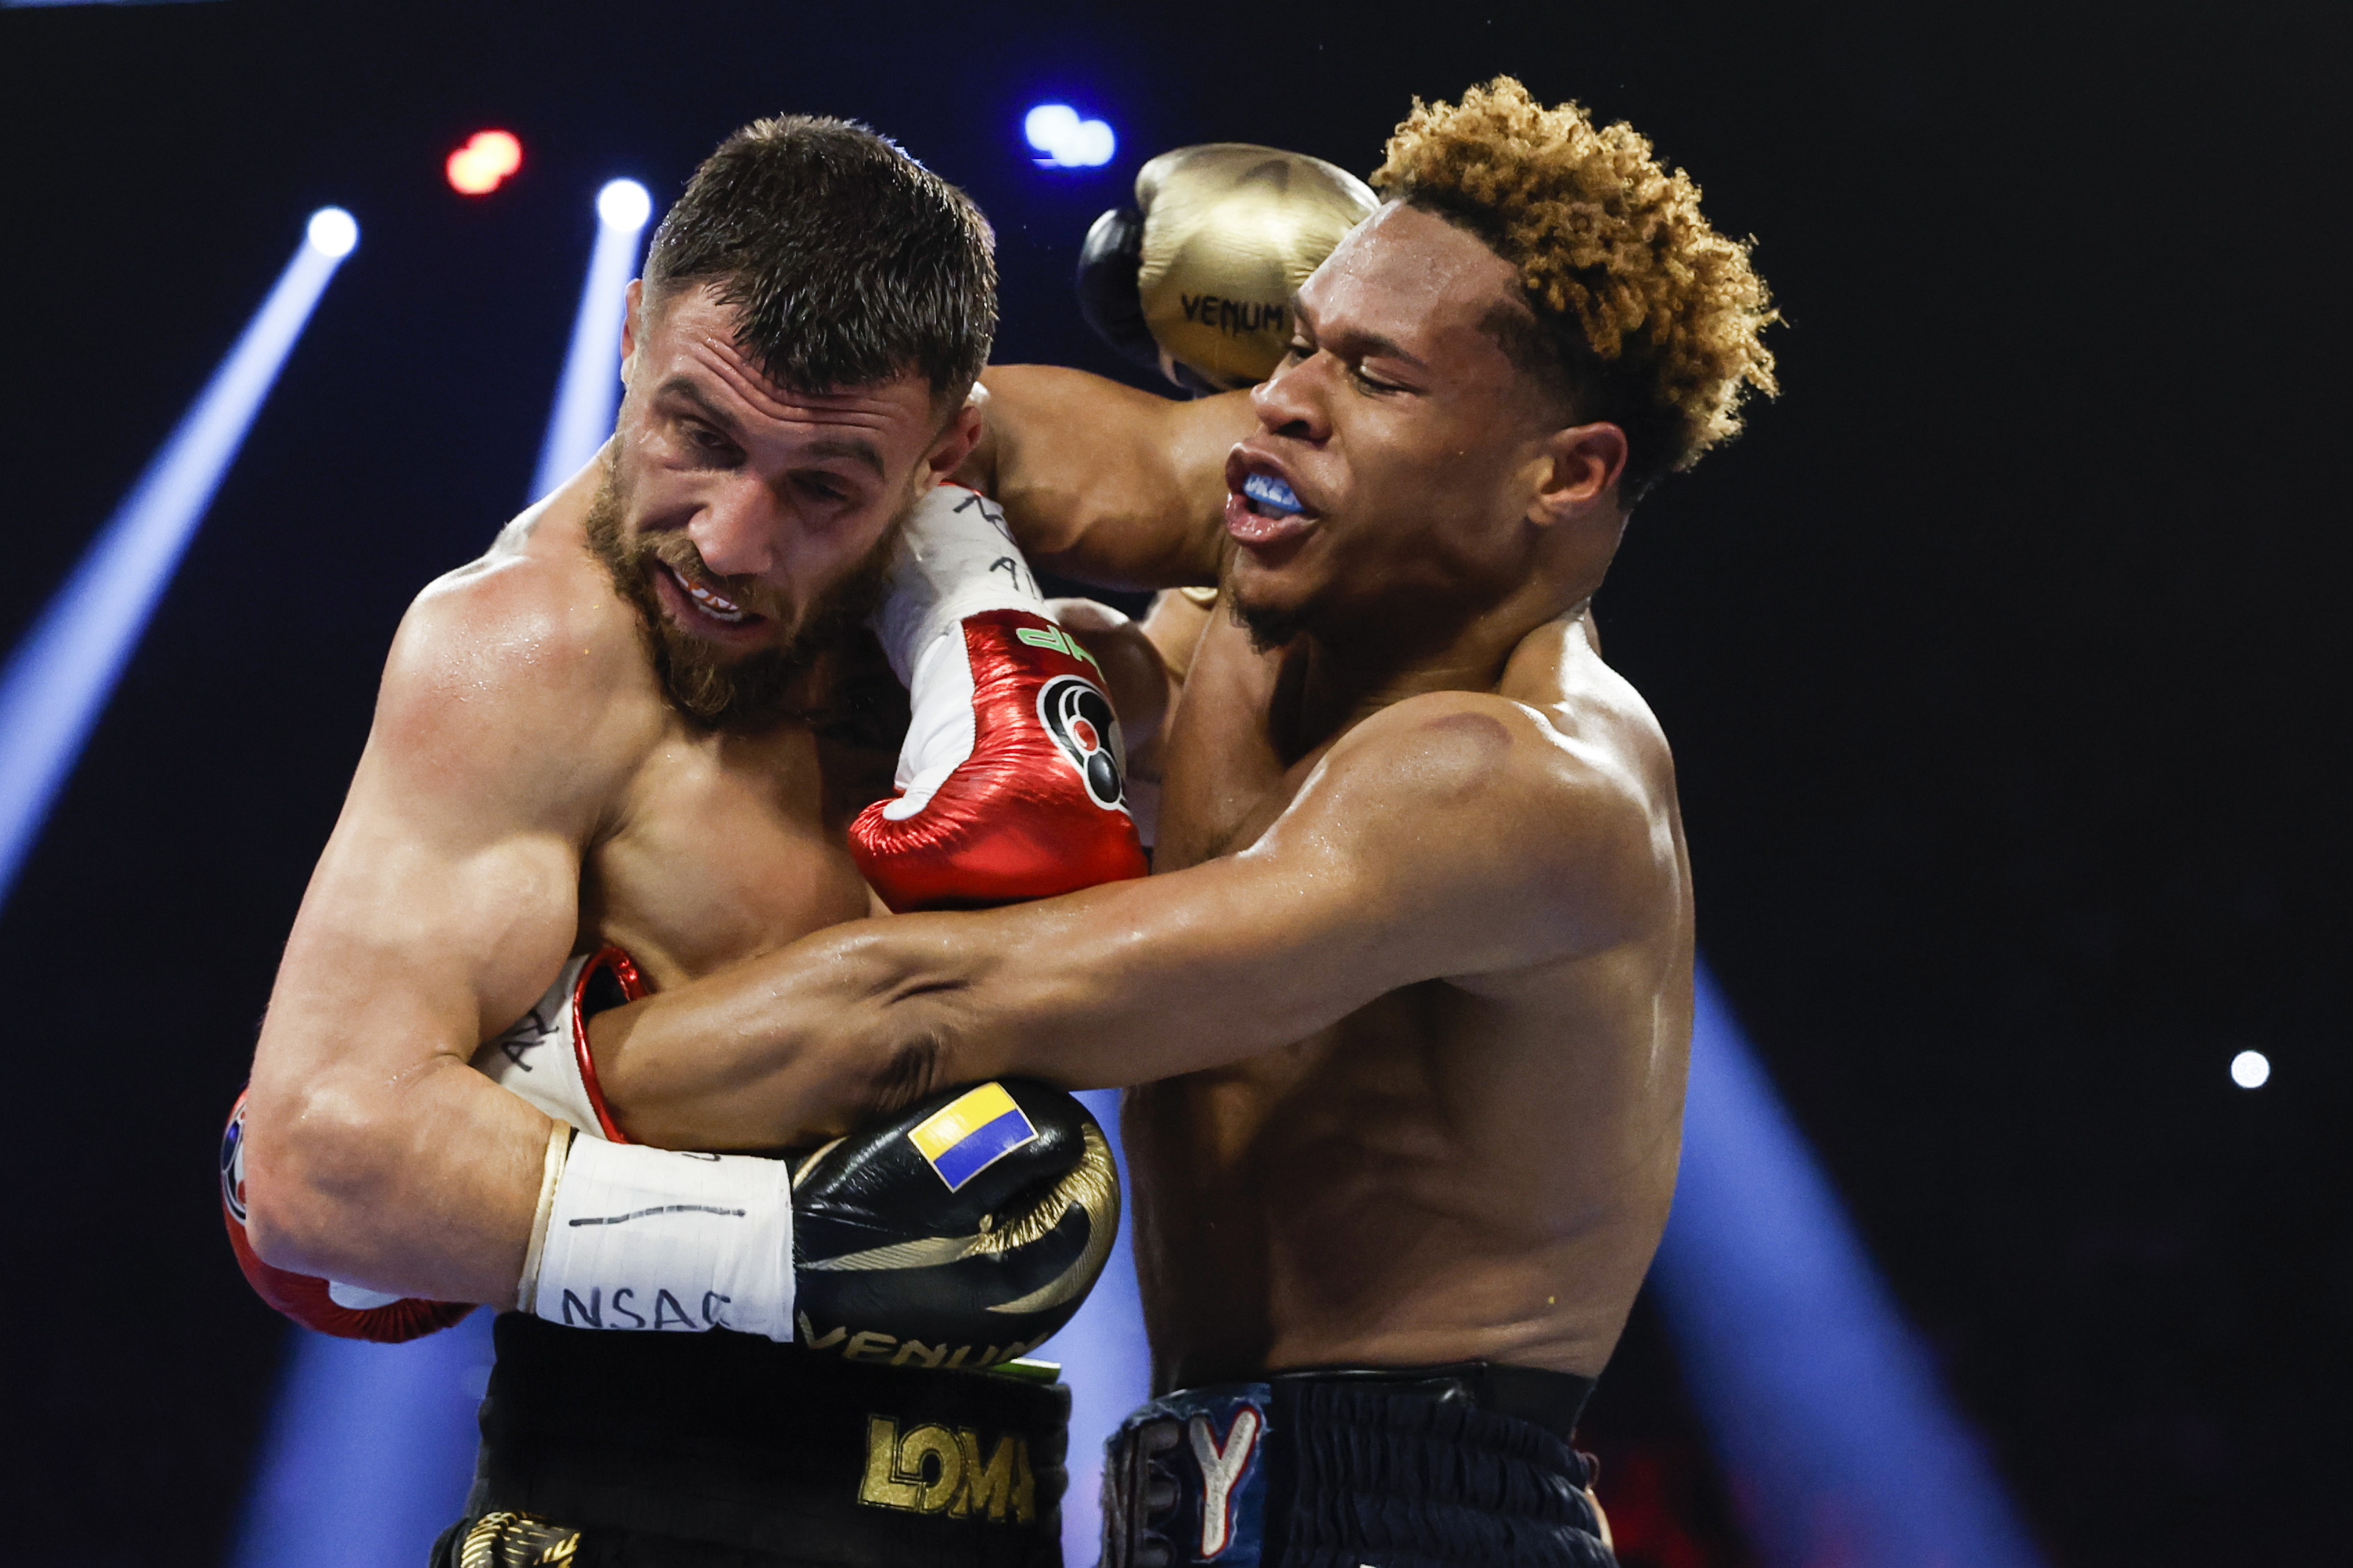 Devin Haney ripped Vasiliy Lomachenko as Loma’s team prepares to file petitions with sanctioning bodies